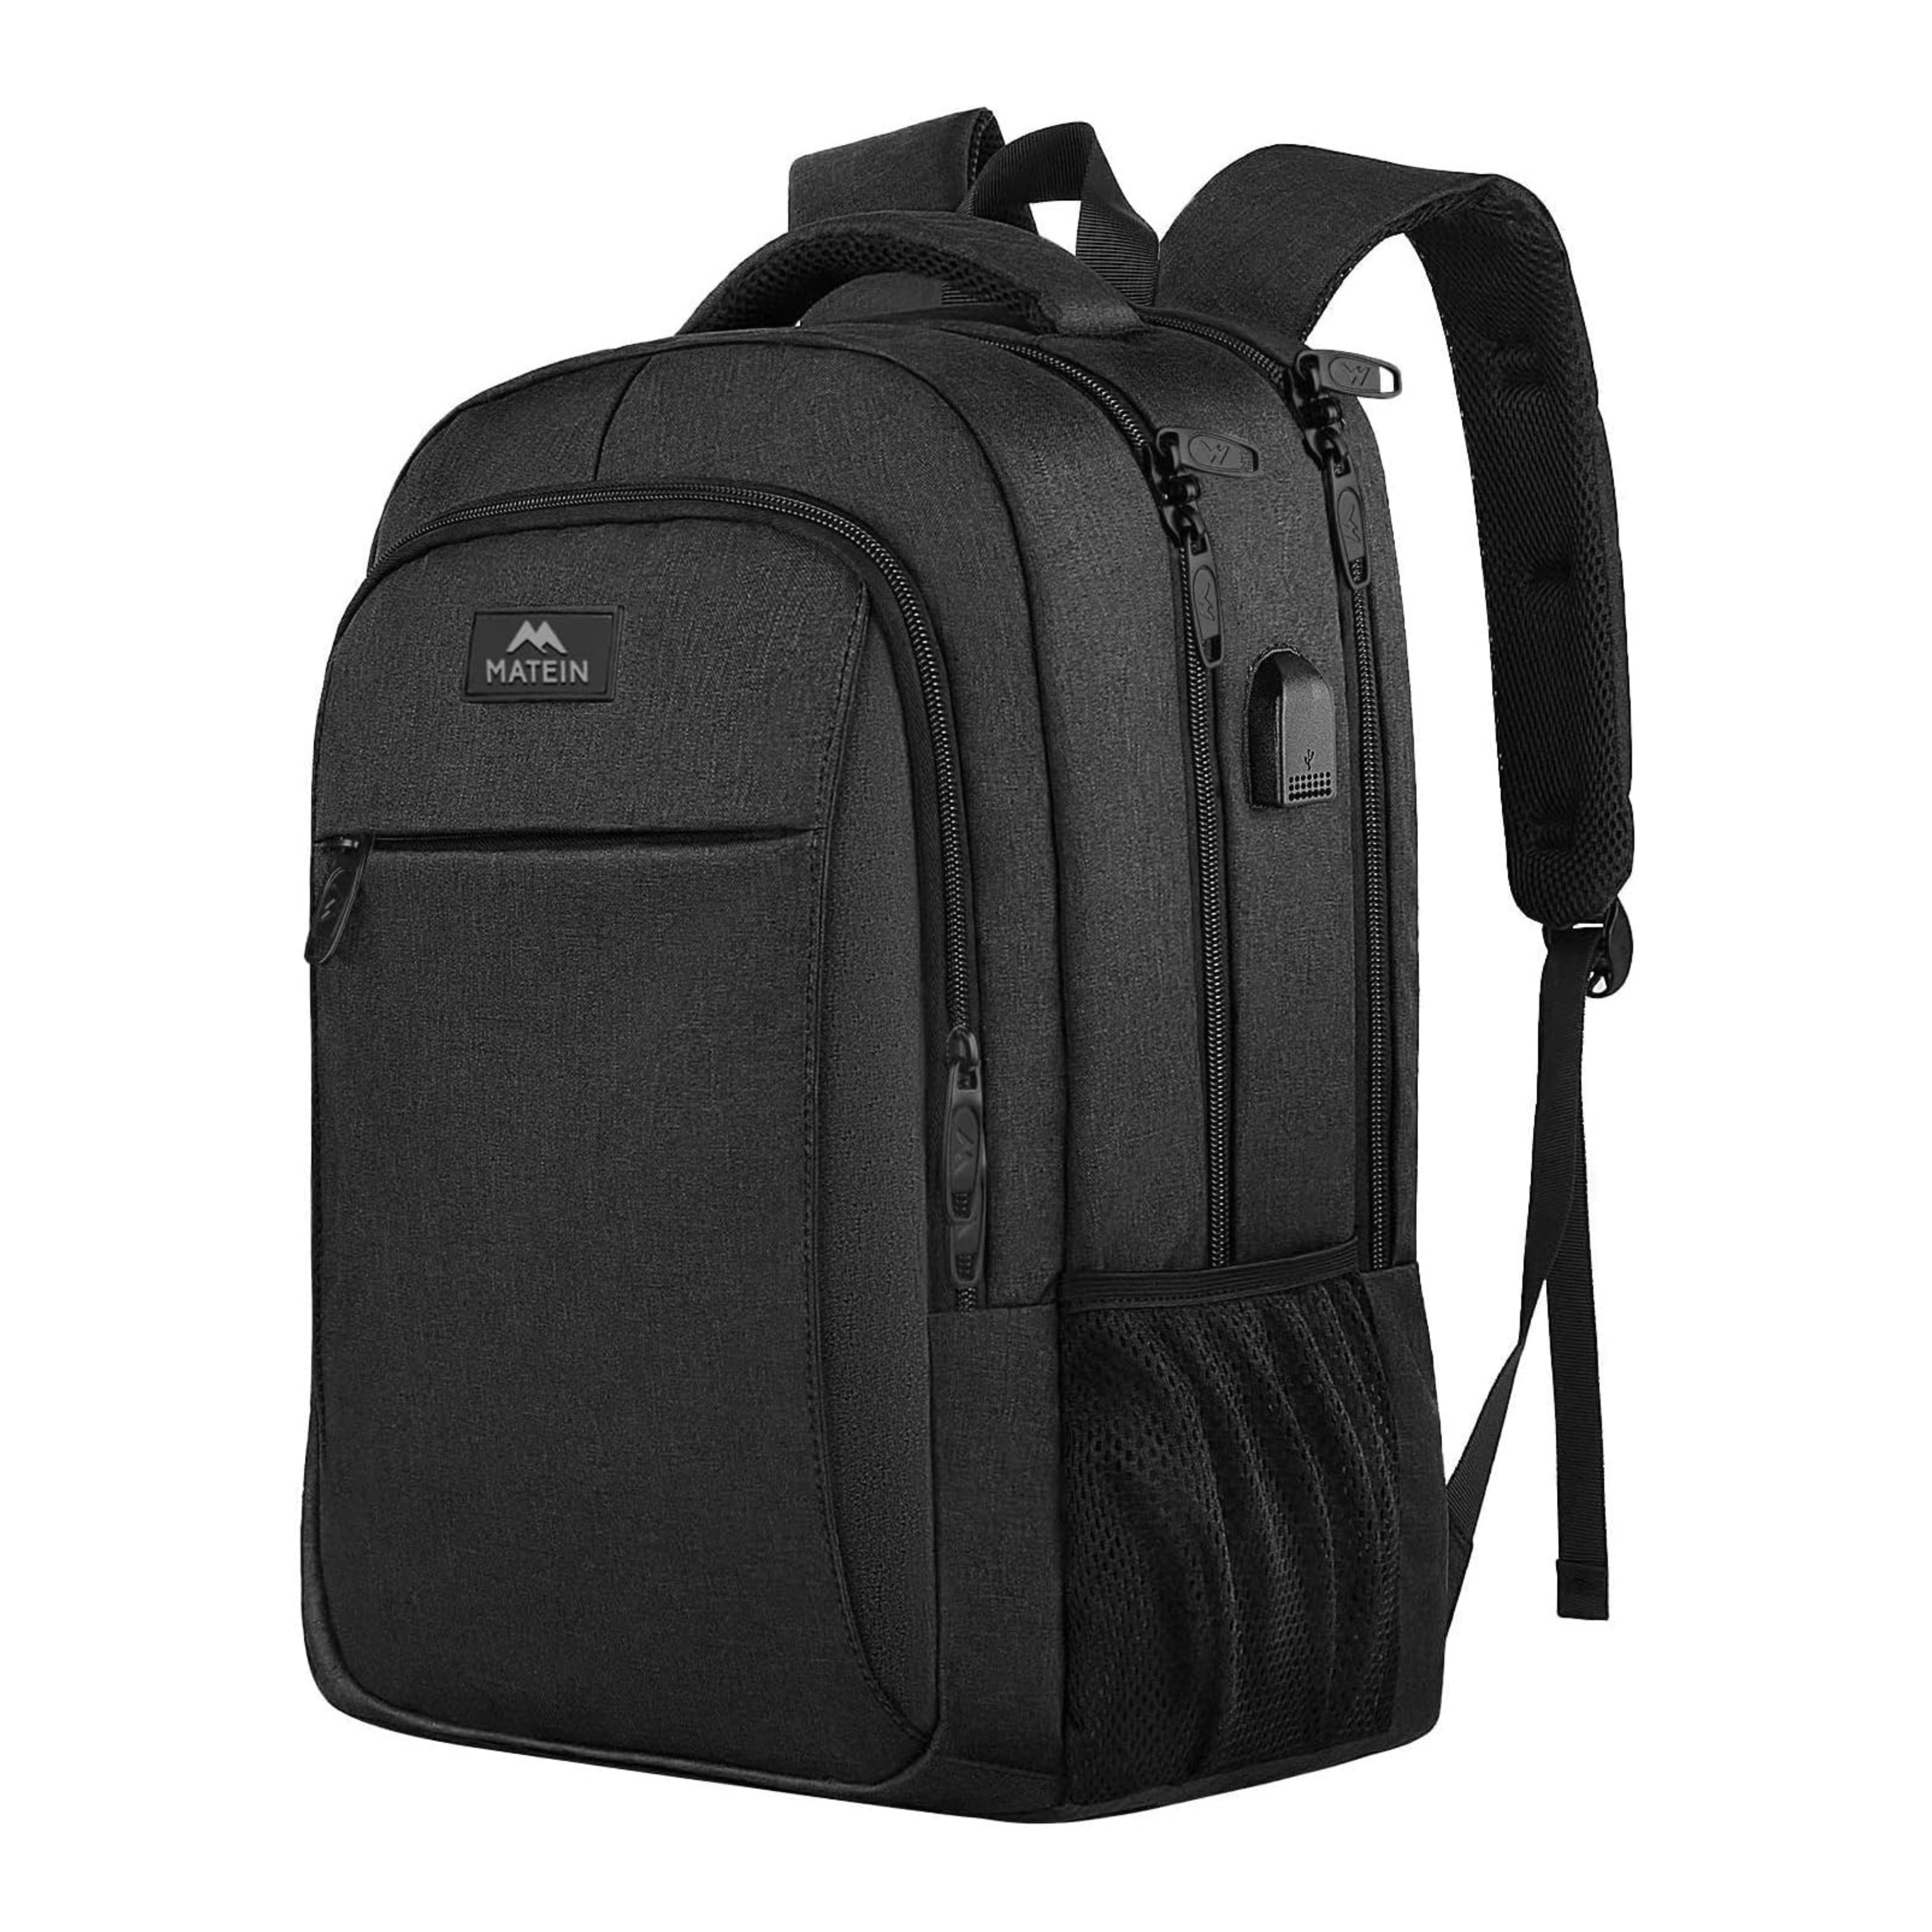 Travel Laptop Backpack,Business Anti Theft Slim Durable Laptops Backpack with USB Charging Port,Water Resistant College School Computer Bag for Women & Men Fits 15.6 Inch Laptop and Notebook